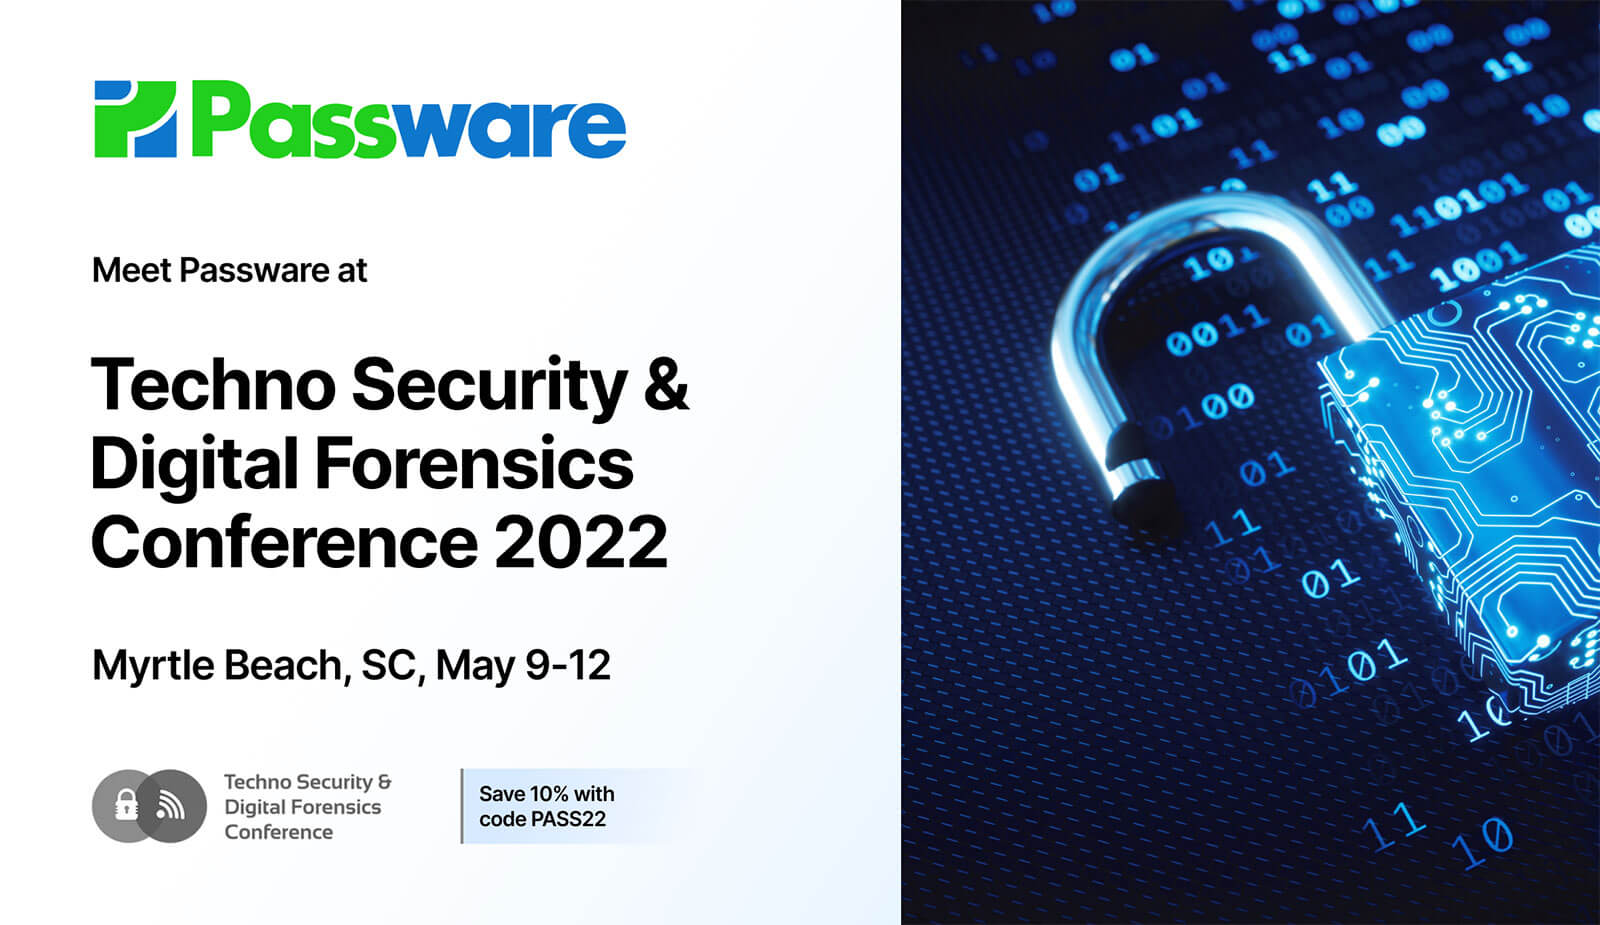 Passware at Techno Security & Digital Forensics Conference 2022